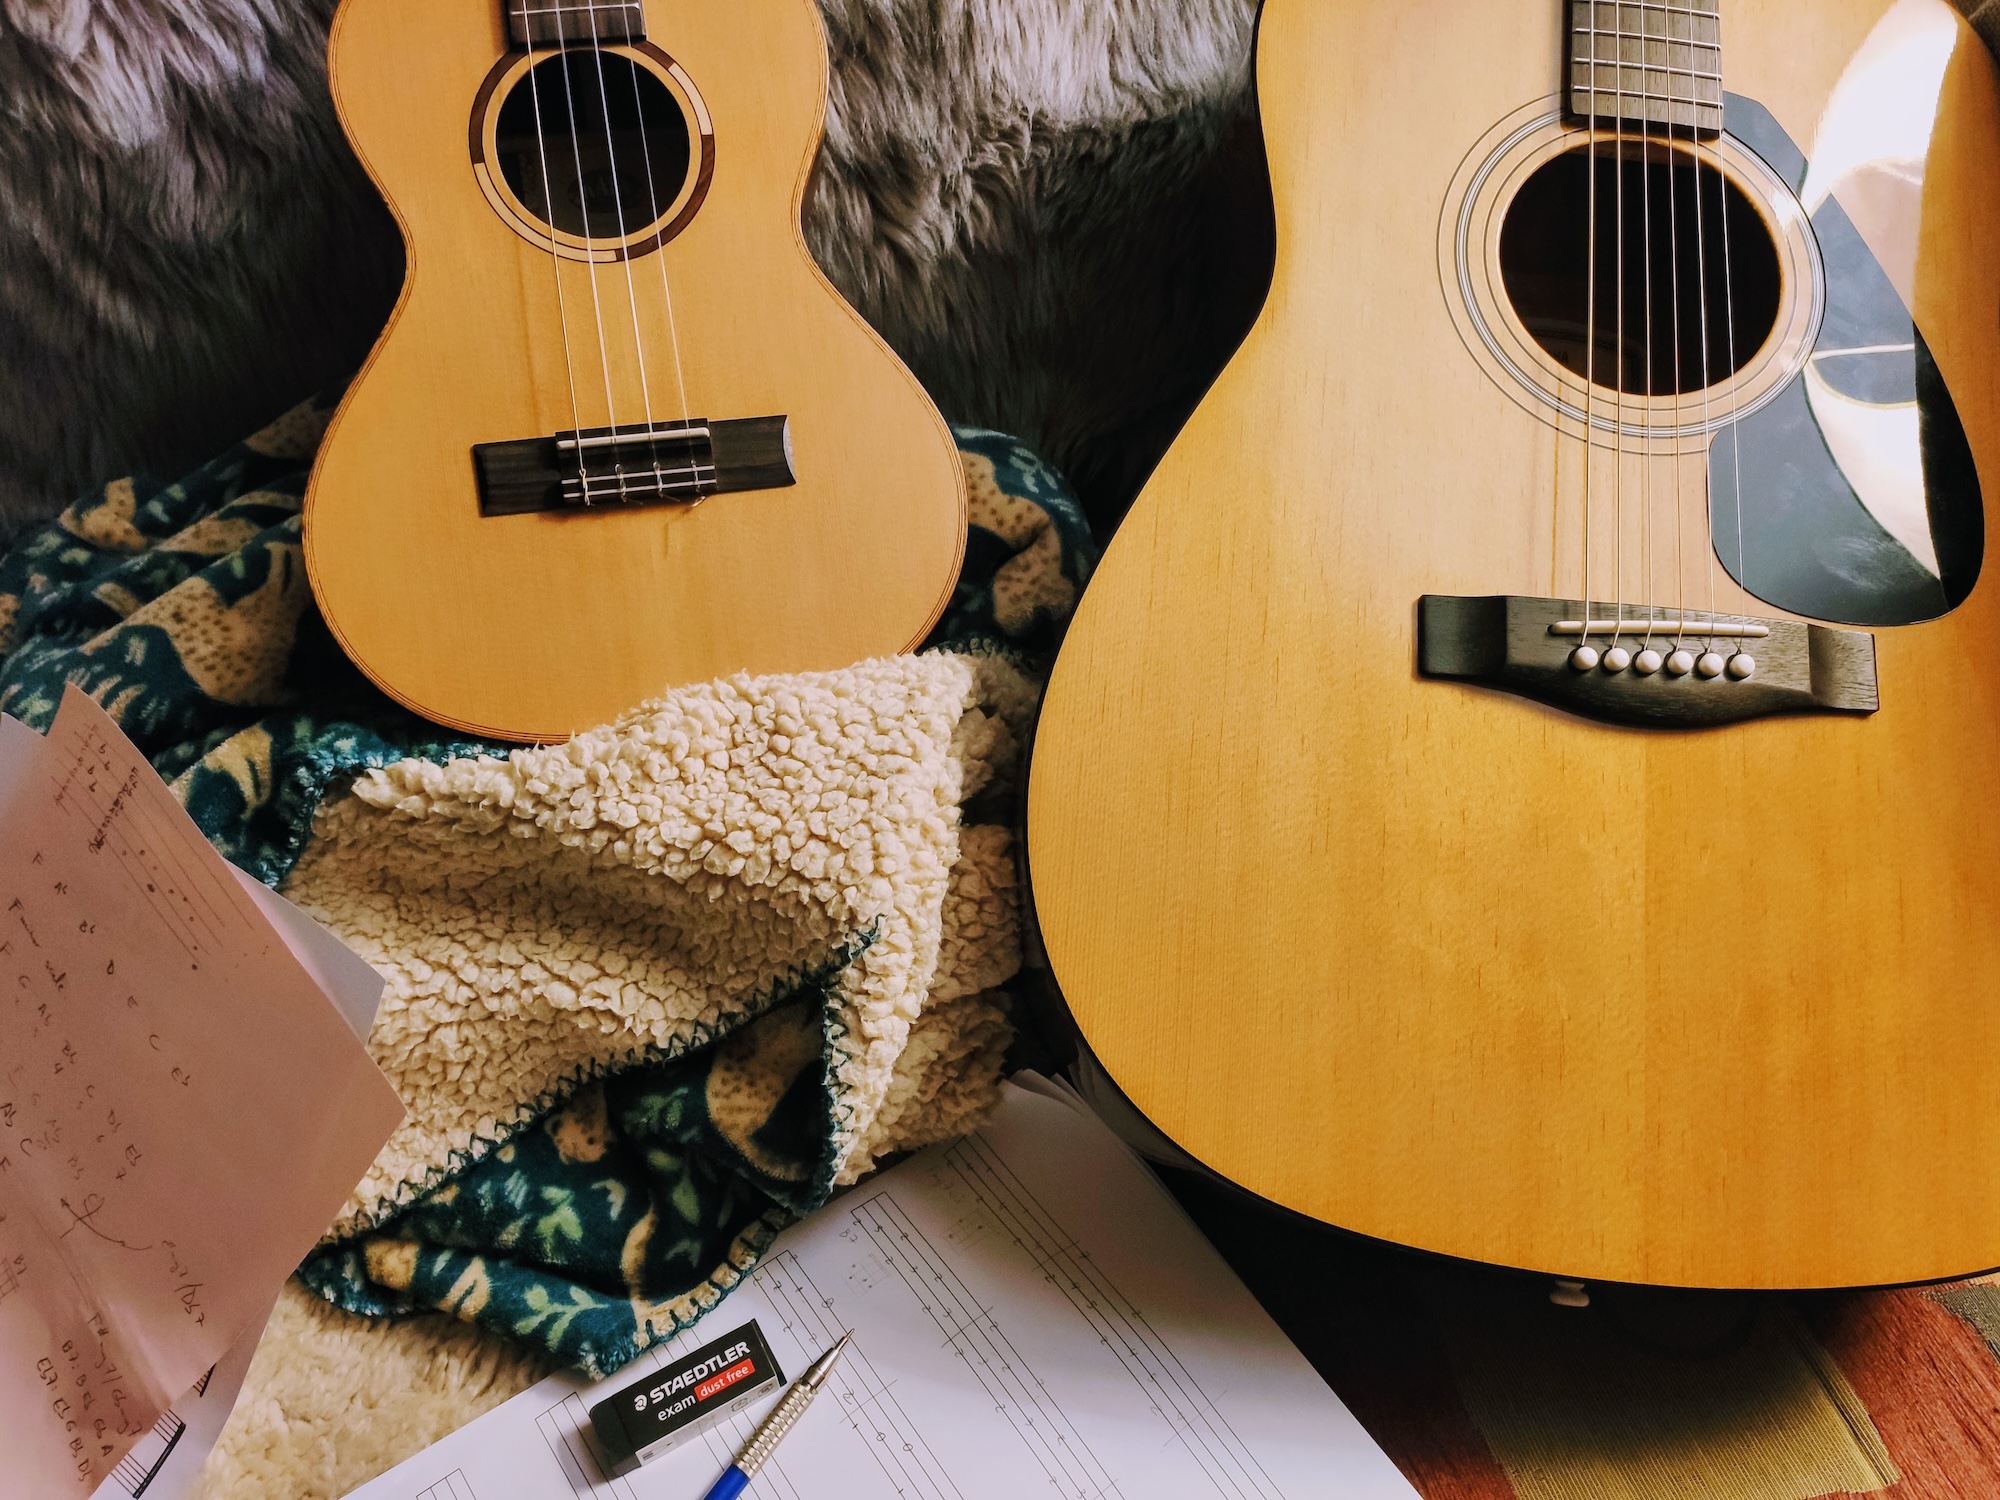 Low-G ukulele and guitar, together with some music sheets.